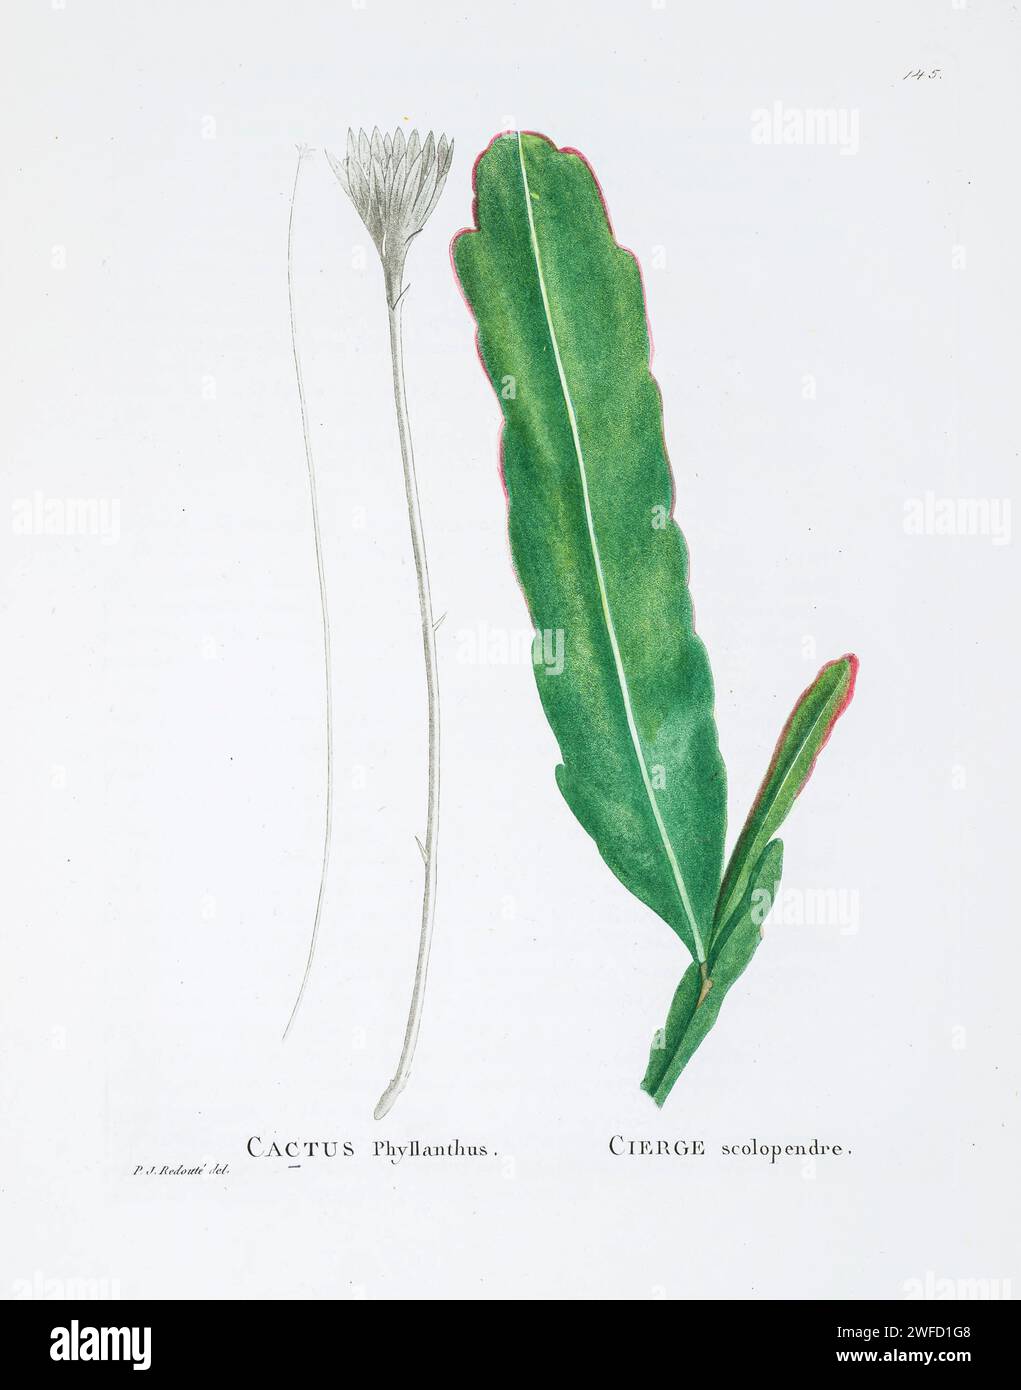 Epiphyllum phyllanthus (L.) Haw. Here As Cactus phyllanthus from History of Succulent Plants [Plantarum historia succulentarum / Histoire des plantes grasses] painted by Pierre-Joseph Redouté and described by Augustin Pyramus de Candolle 1799 Epiphyllum phyllanthus, commonly known as the climbing cactus, is a species of epiphytic cacti. It has no leaves, instead having stems that photosynthesise. It is thought to be pollinated by hawkmoths, as the flowers only open at night and produce a strong fragrance. Stock Photo